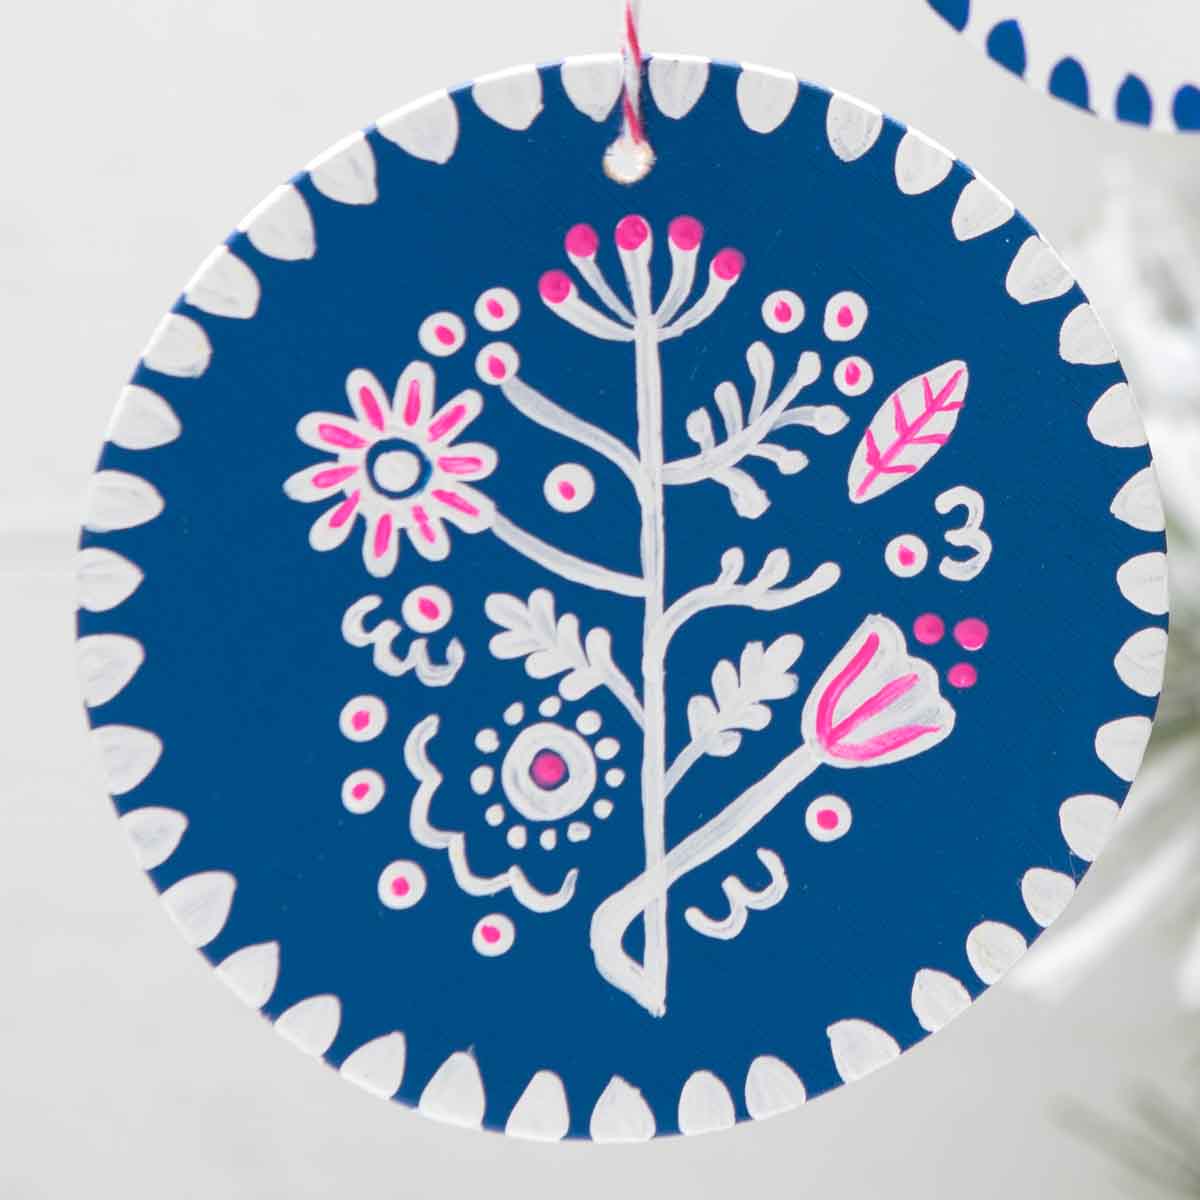 Hand-Painted Nordic Ornaments